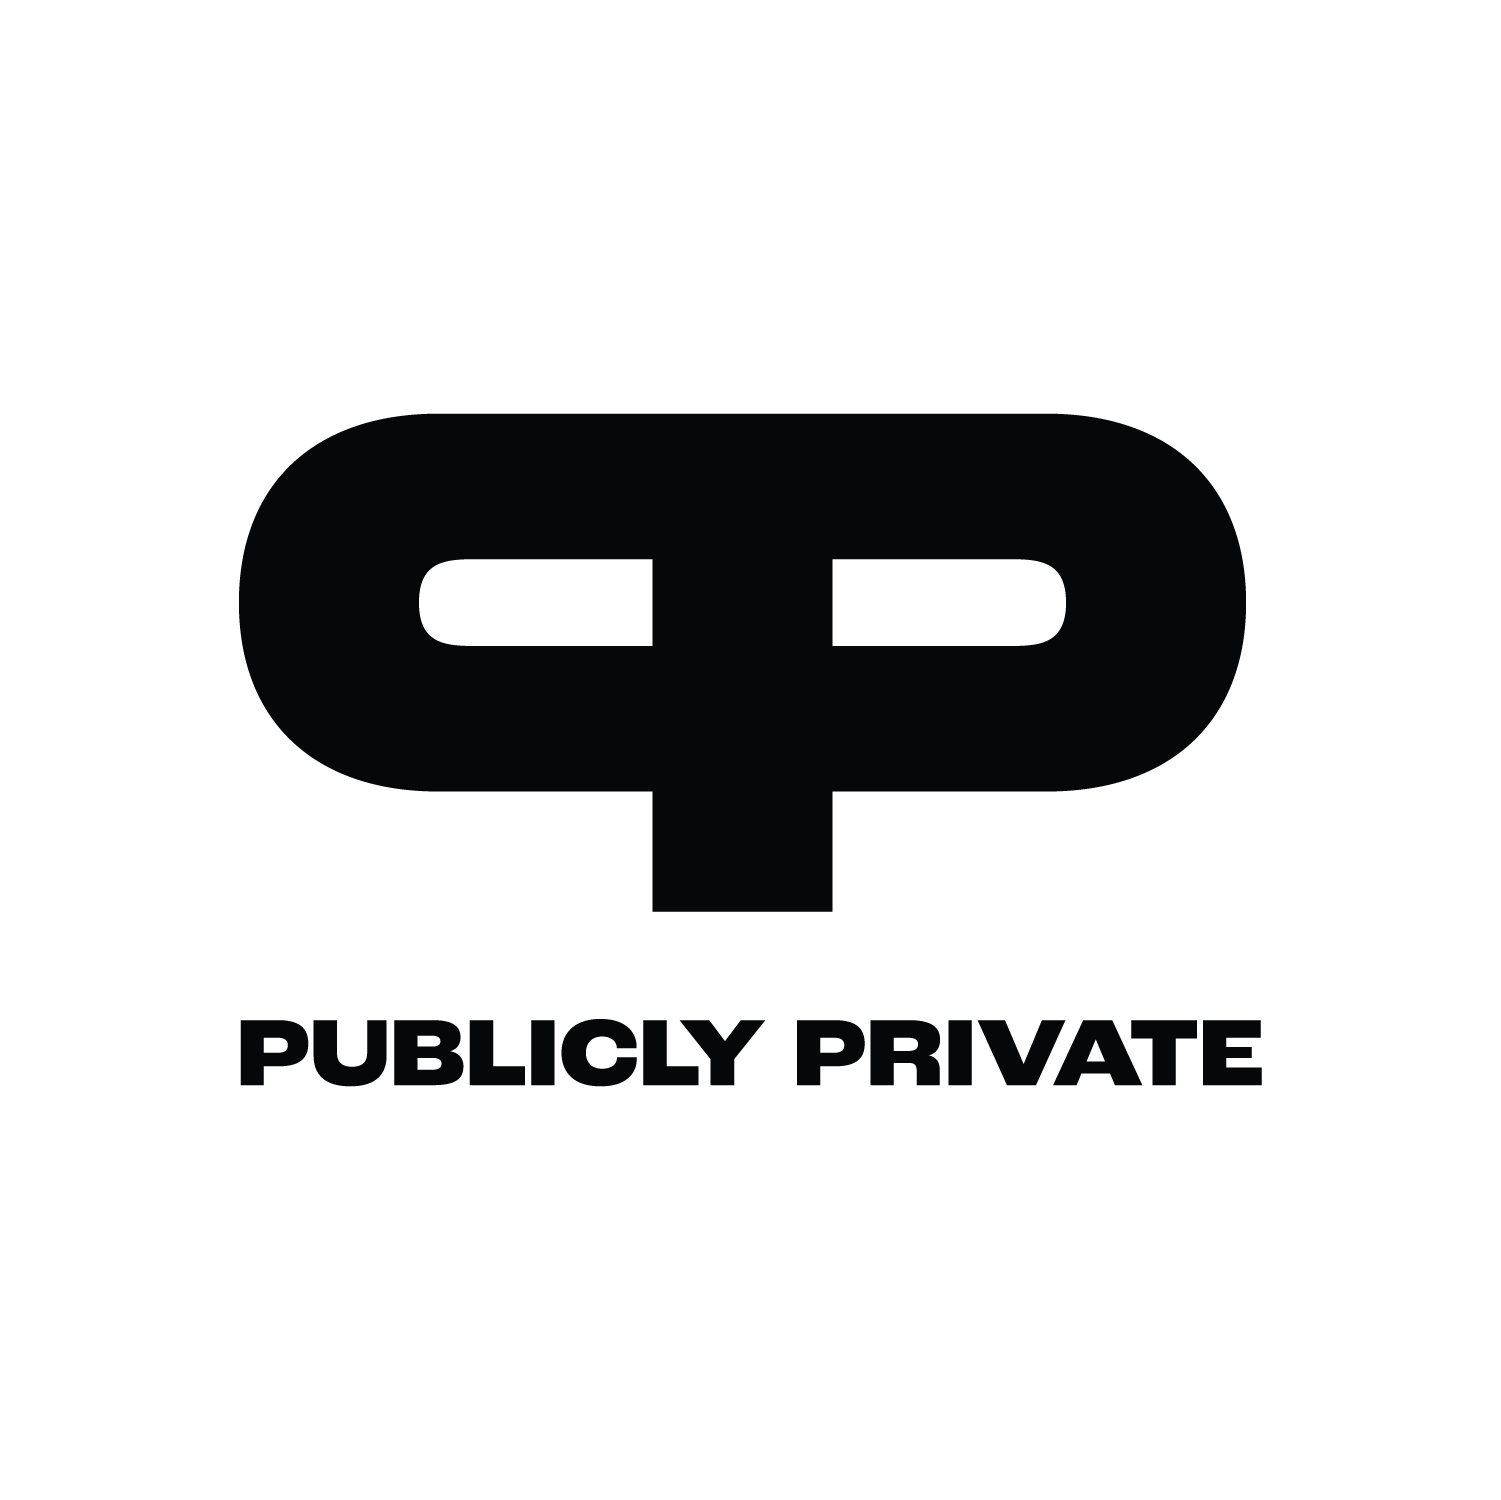 Publicly Private Is Now Part of the AmazonSmile Program